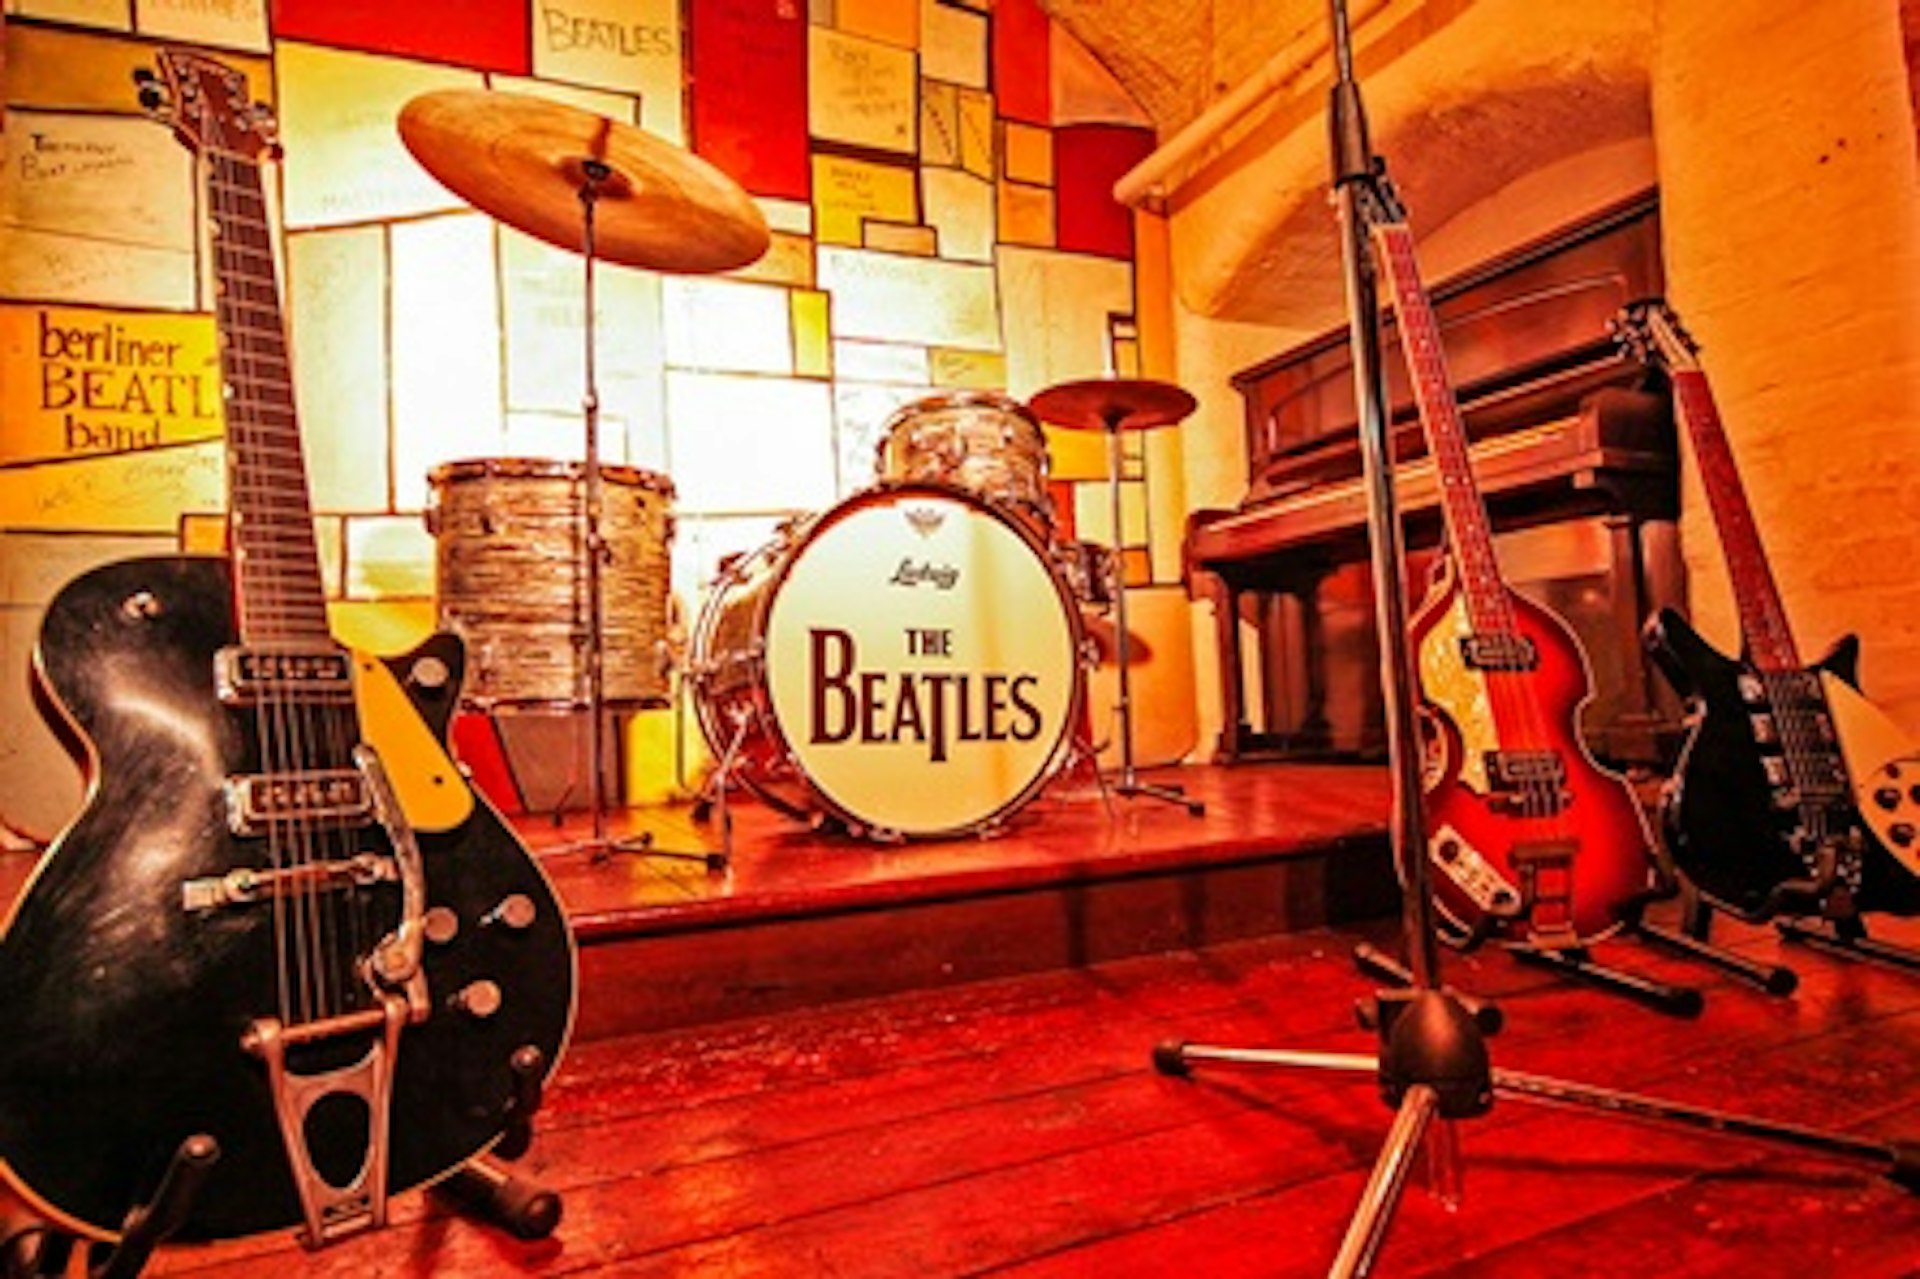 One Night Liverpool City Break with Dinner and Visit to The Beatles Story Exhibition for Two 1